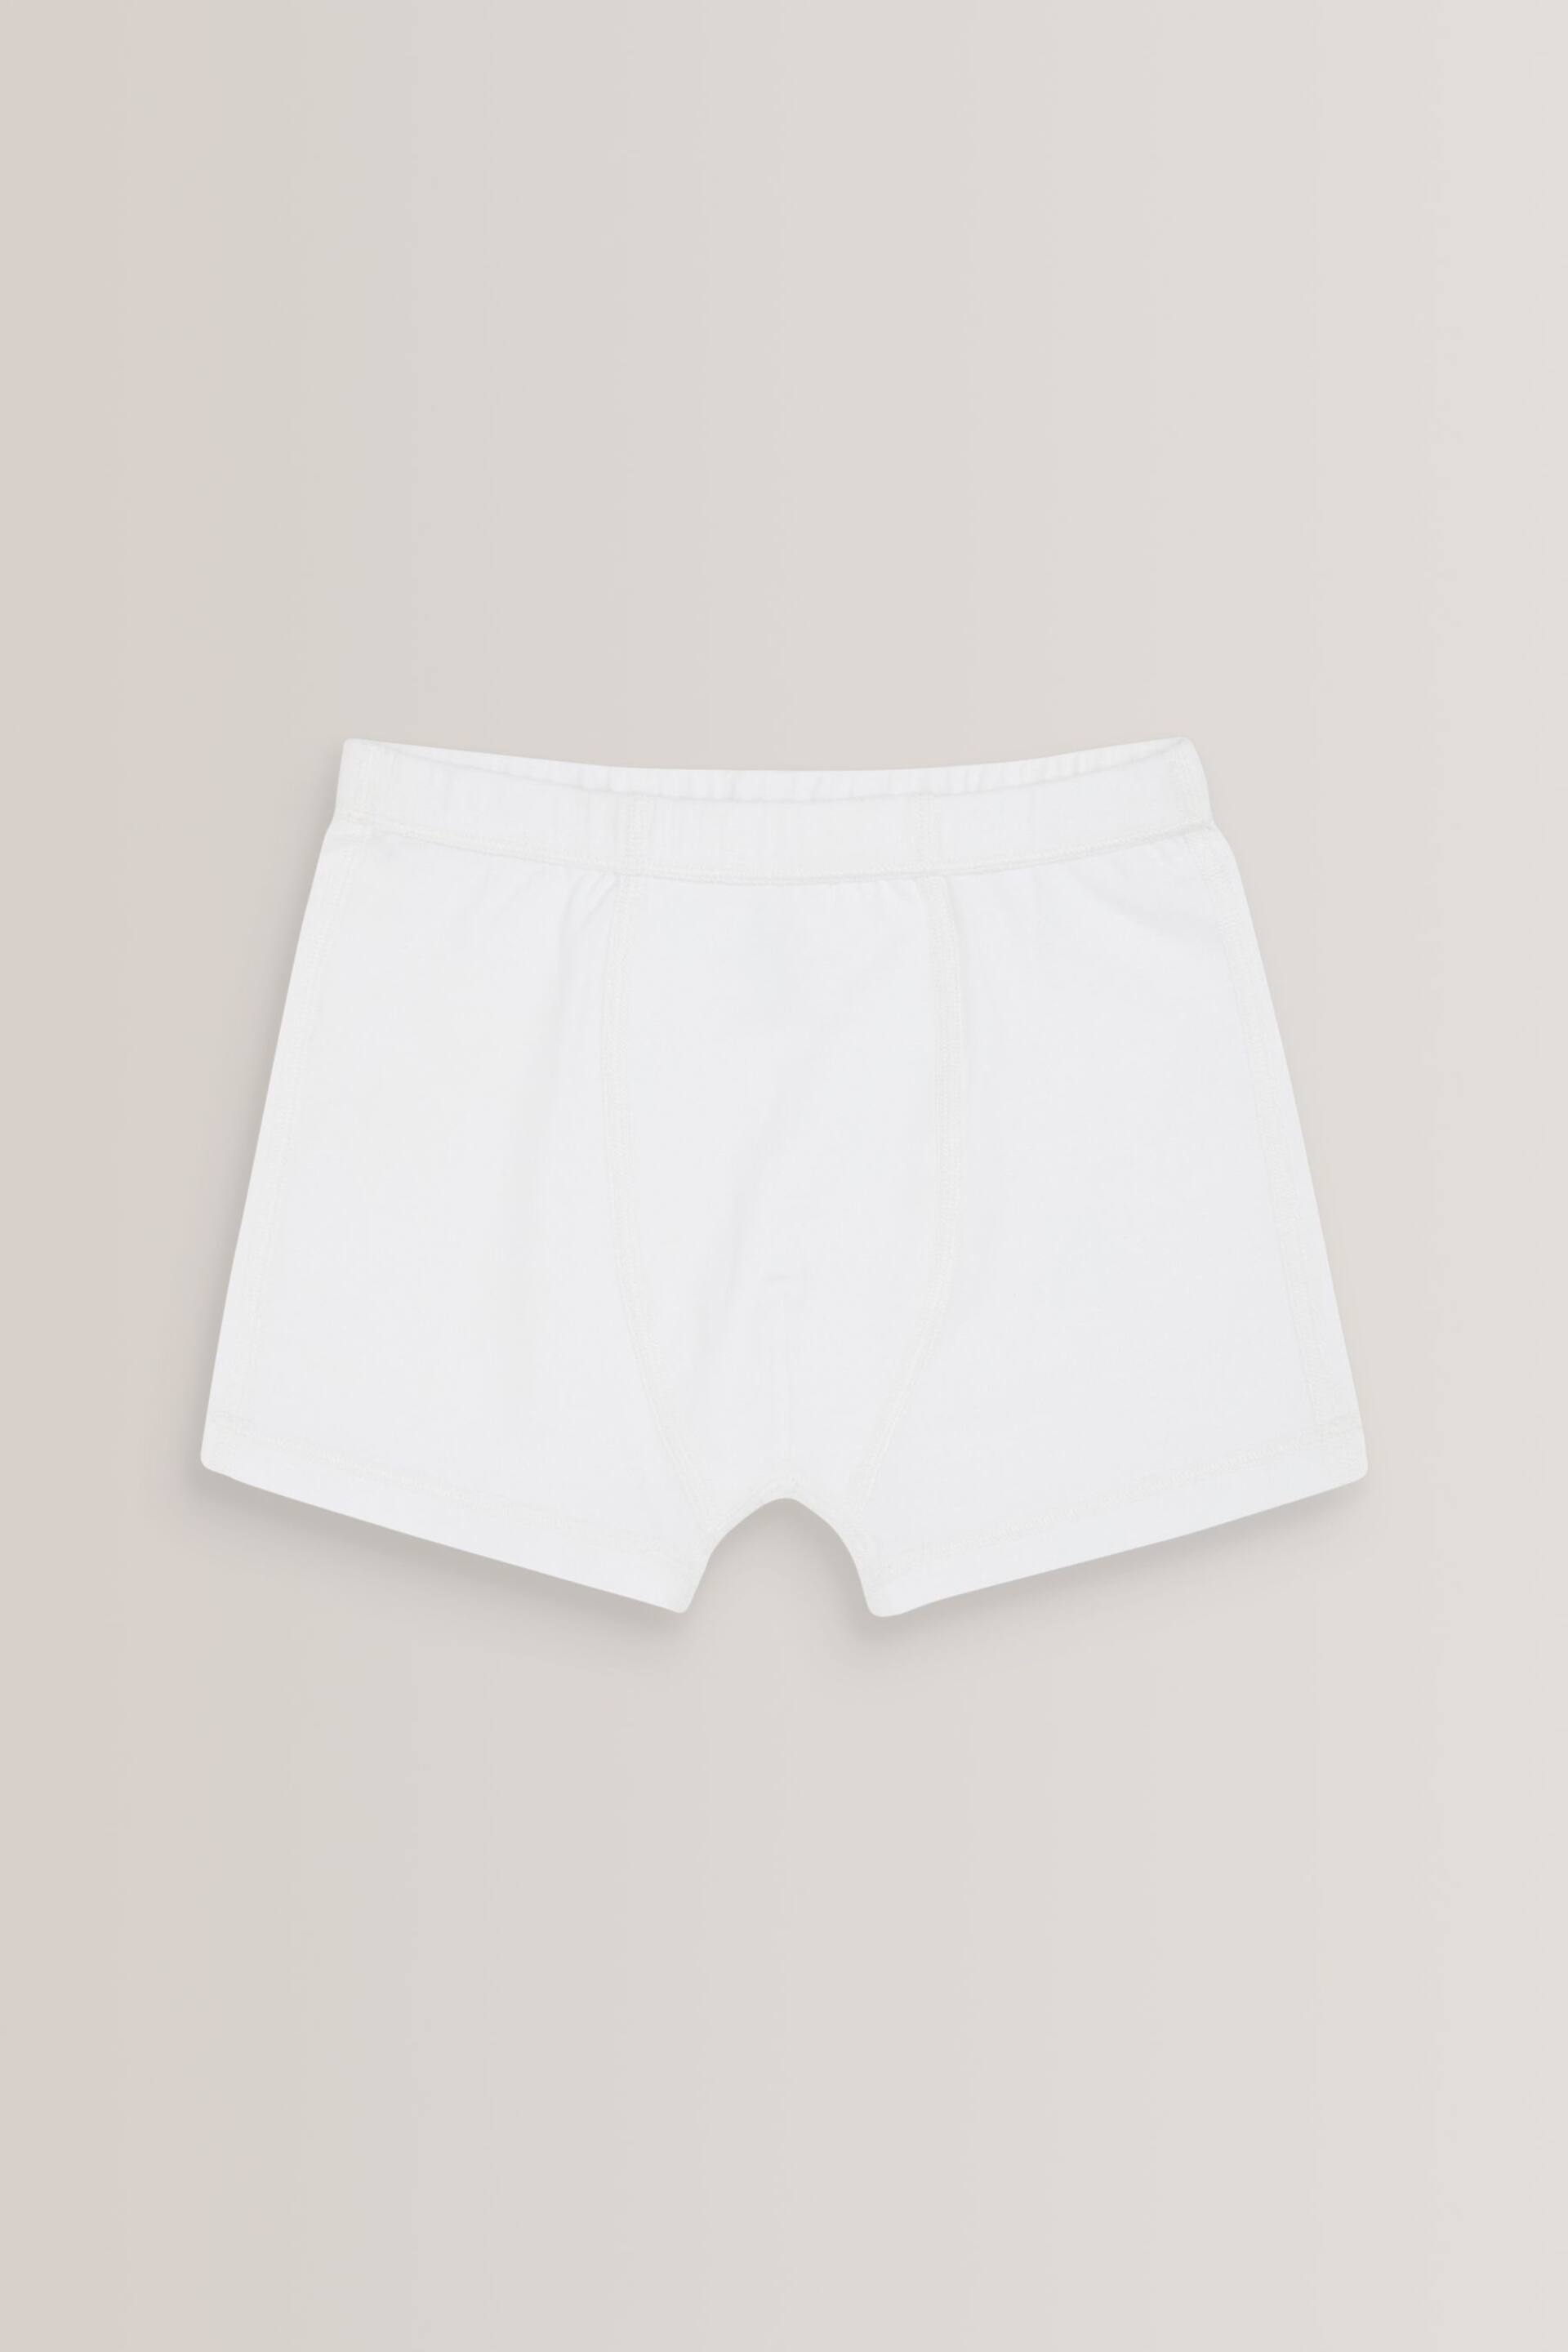 White/Blue 3 Pack Kind To Skin Trunks (1.5-12yrs) - Image 5 of 5